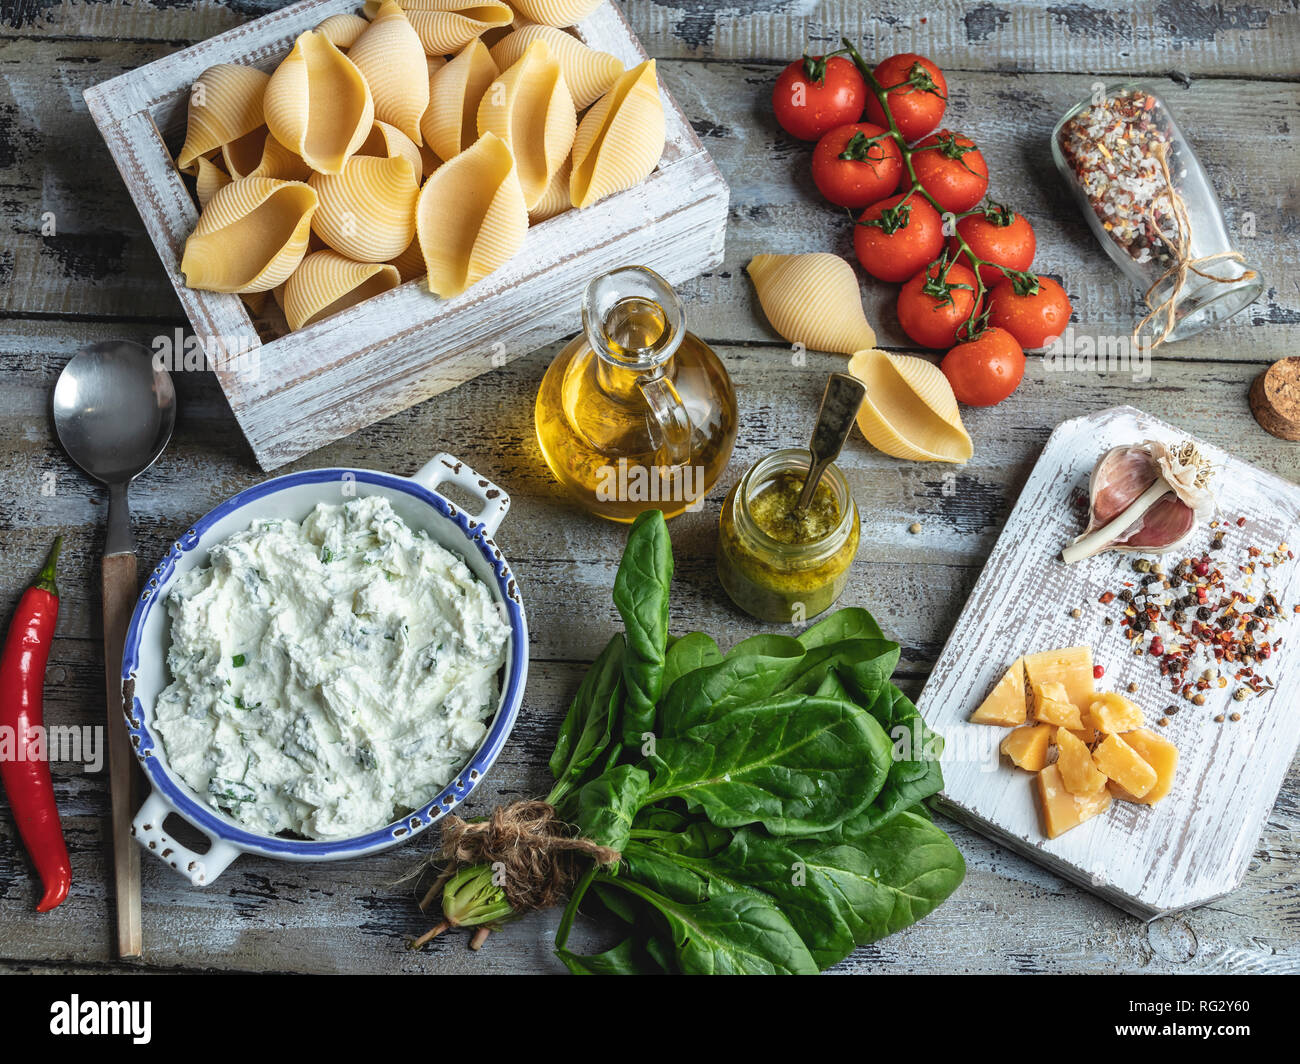 Ingredients for cooking pasta. Conchiglioni, spinach leaves, cherry tomatoes, parmesan cheese, cream cheese, olive oil, salt, garlic, rustic style, wo Stock Photo